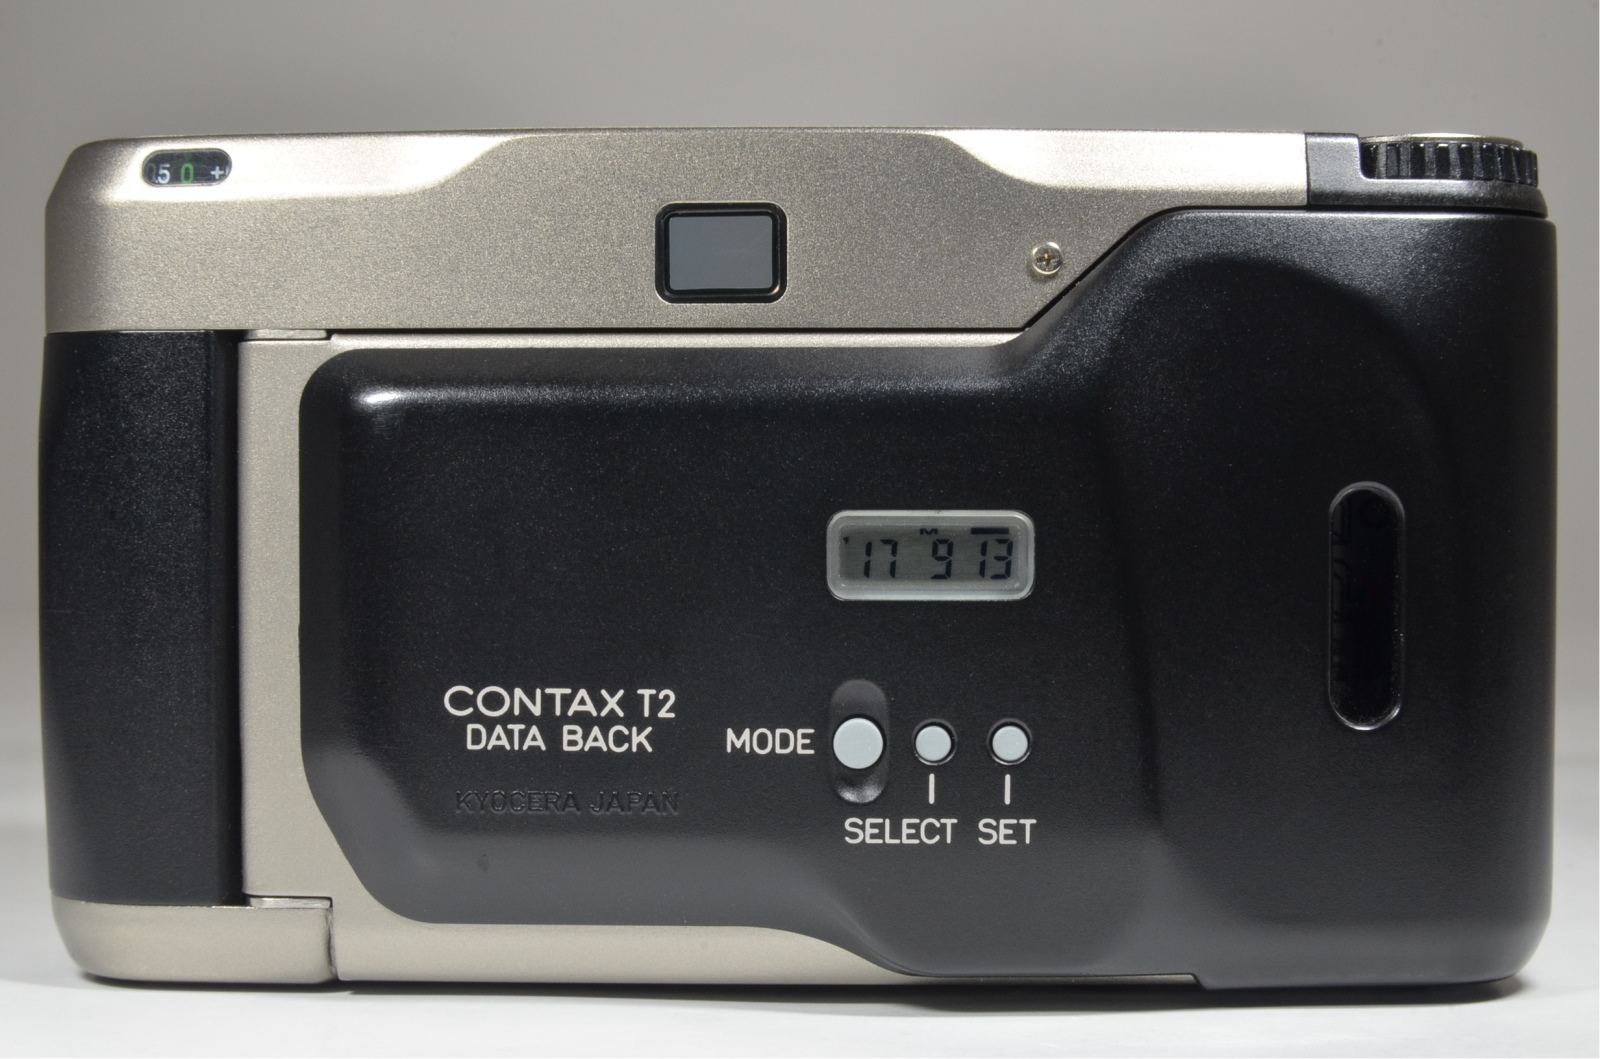 CONTAX T2 Data Back Point & Shoot 35mm Film Camera from JAPAN 